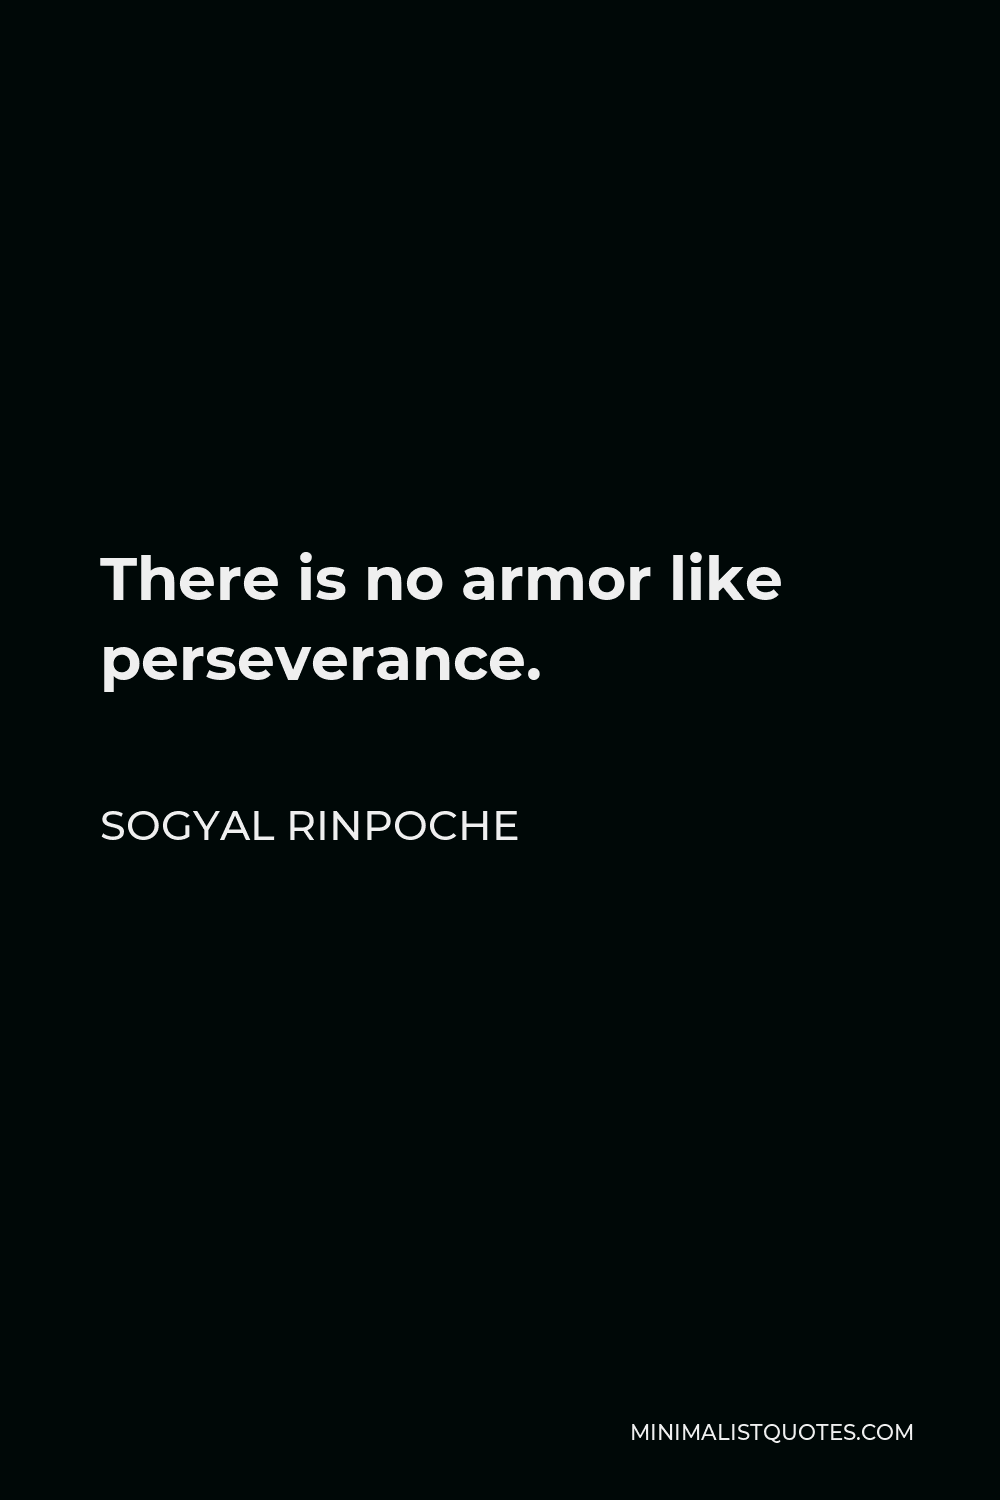 Sogyal Rinpoche Quote - There is no armor like perseverance.